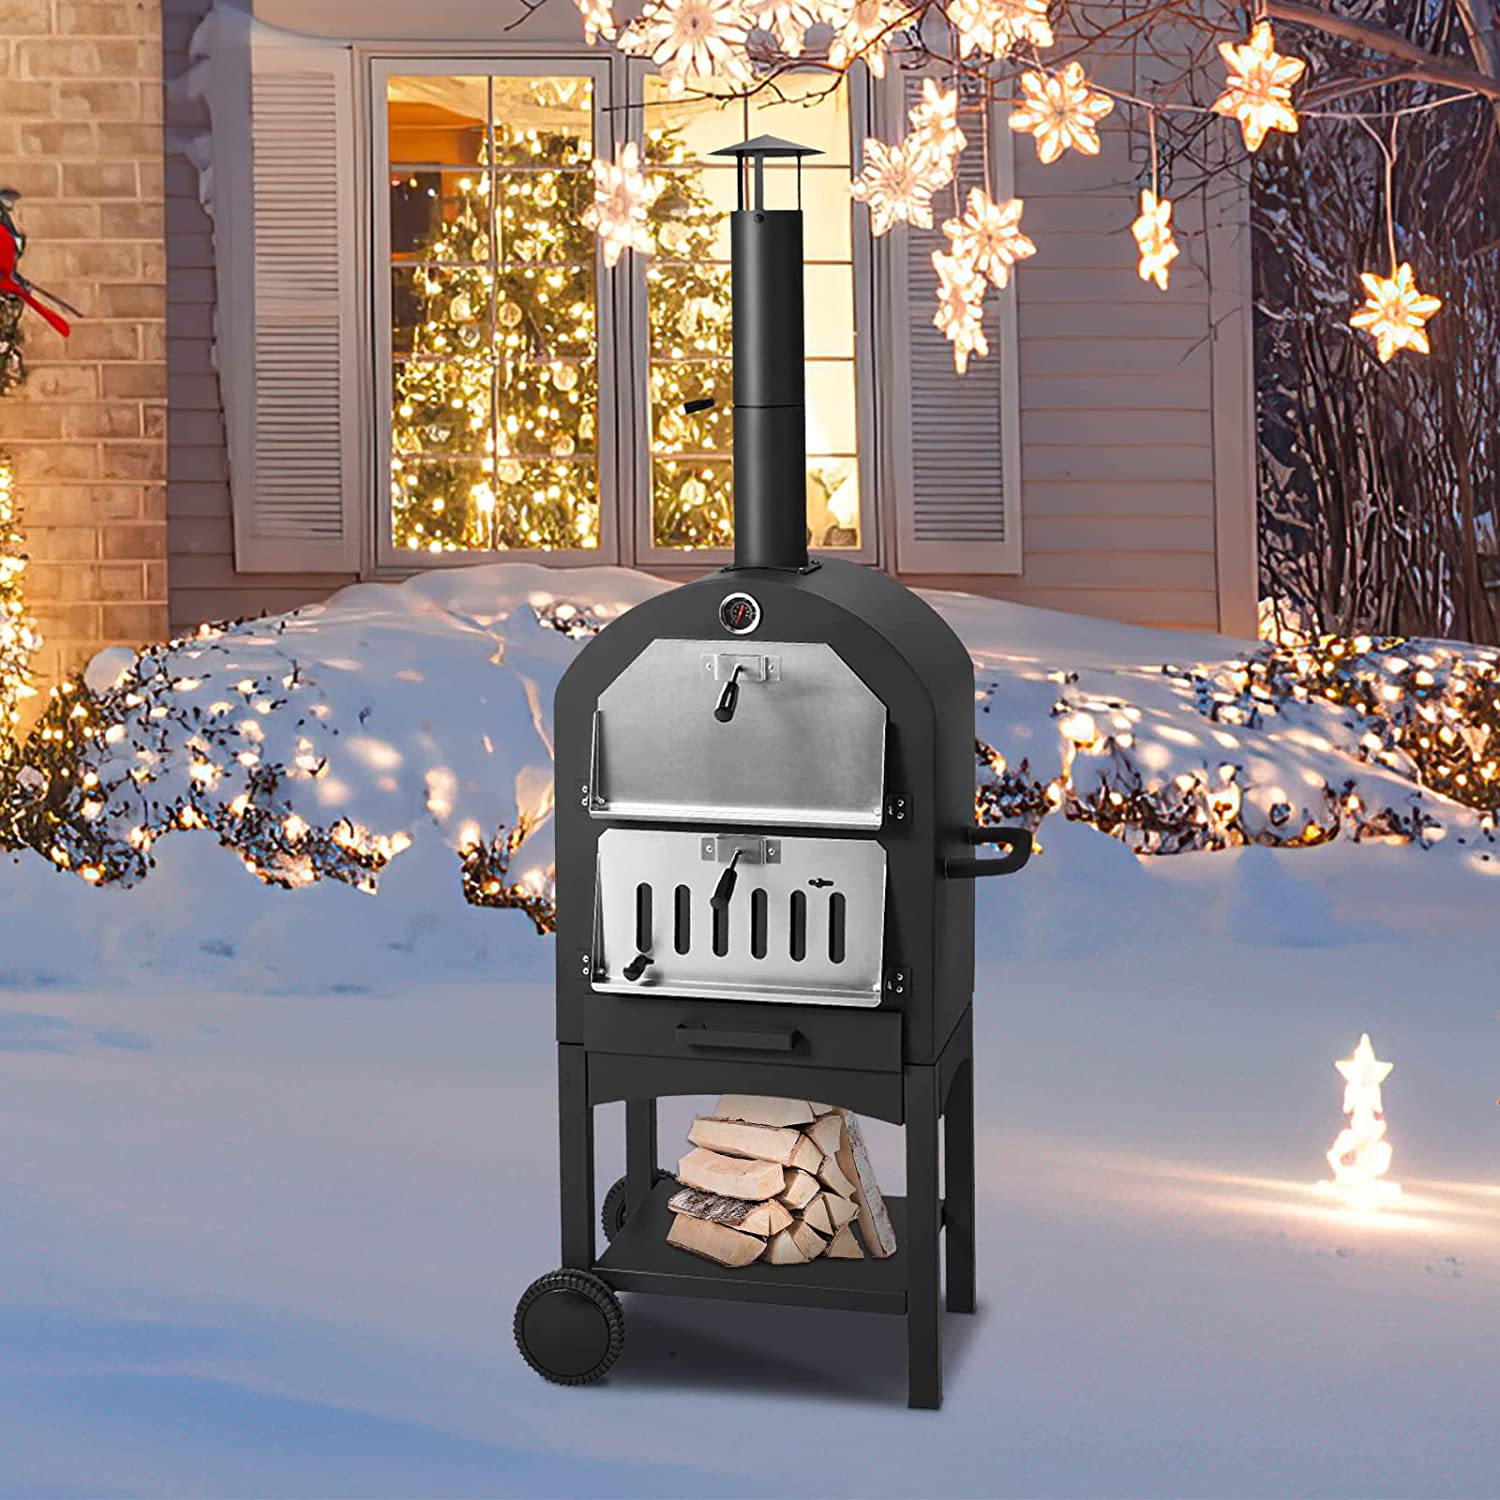 U-MAX Outdoor Pizza Oven Wood Fire with Waterproof Cover